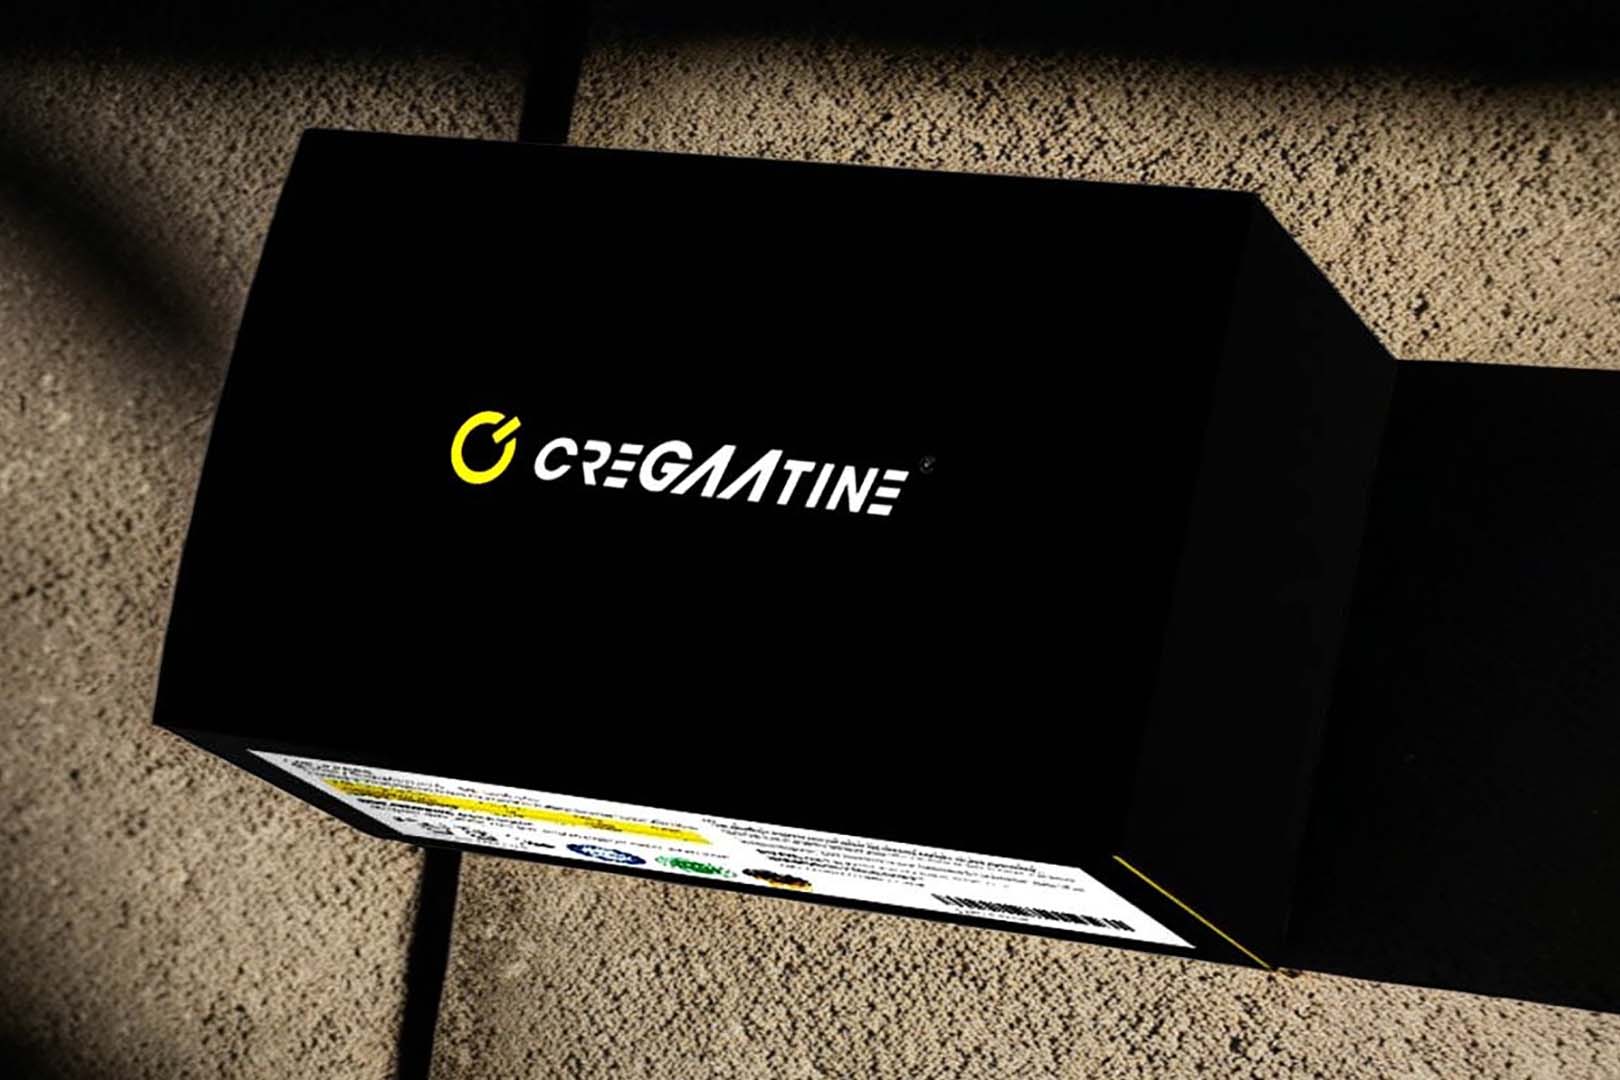 Innovative creatine CreGAAtine begins making some noise in the sports nutrition space